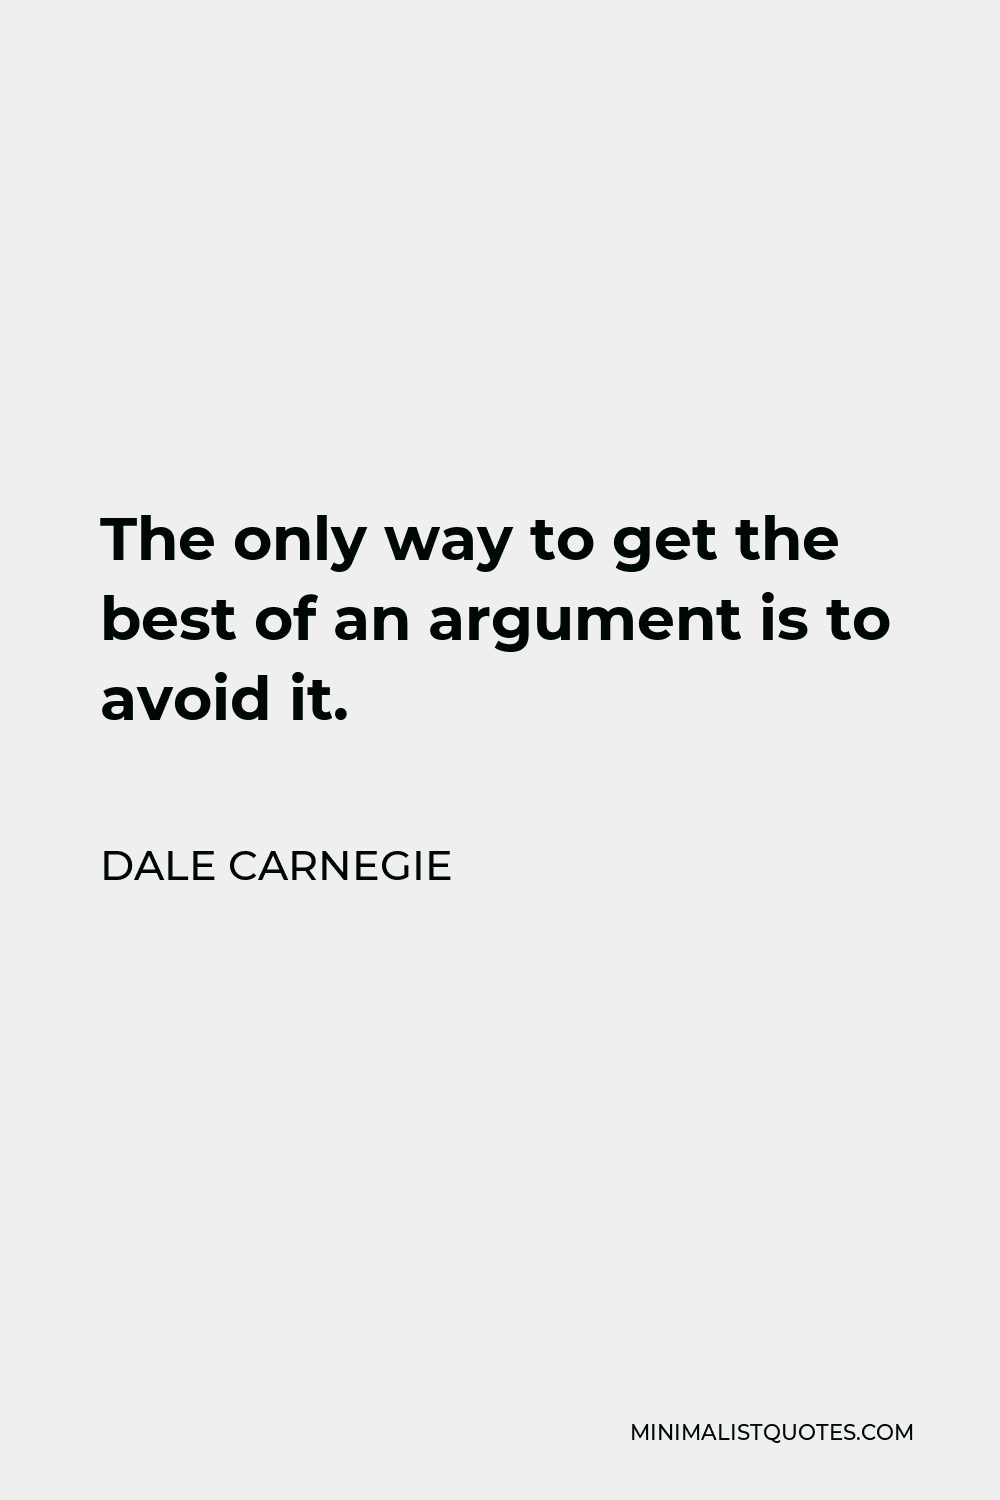 Dale Carnegie Quote - The only way to get the best of an argument is to avoid it.